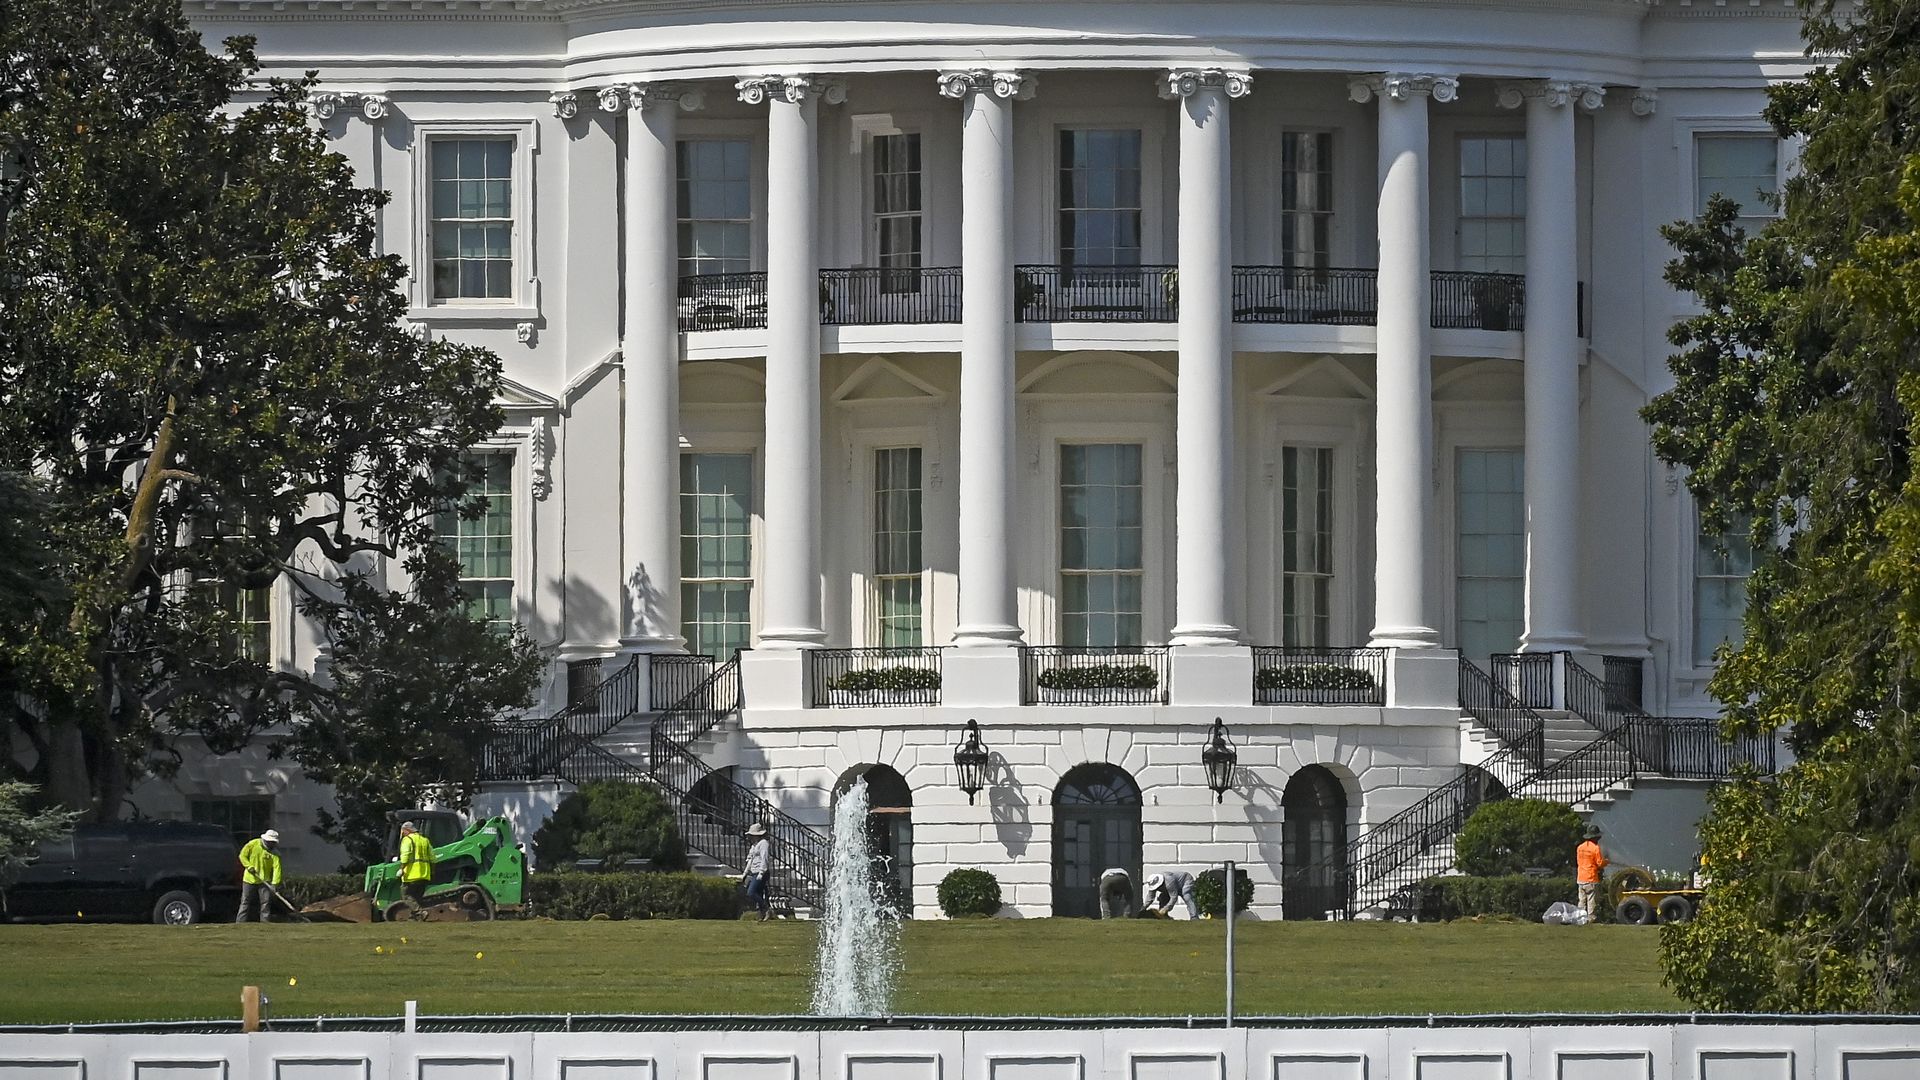 WASHINGTON, DC - September 08: A view of the south lawn of the White House in the wake of the RNC celebration held there, in Washington, DC on September 08.